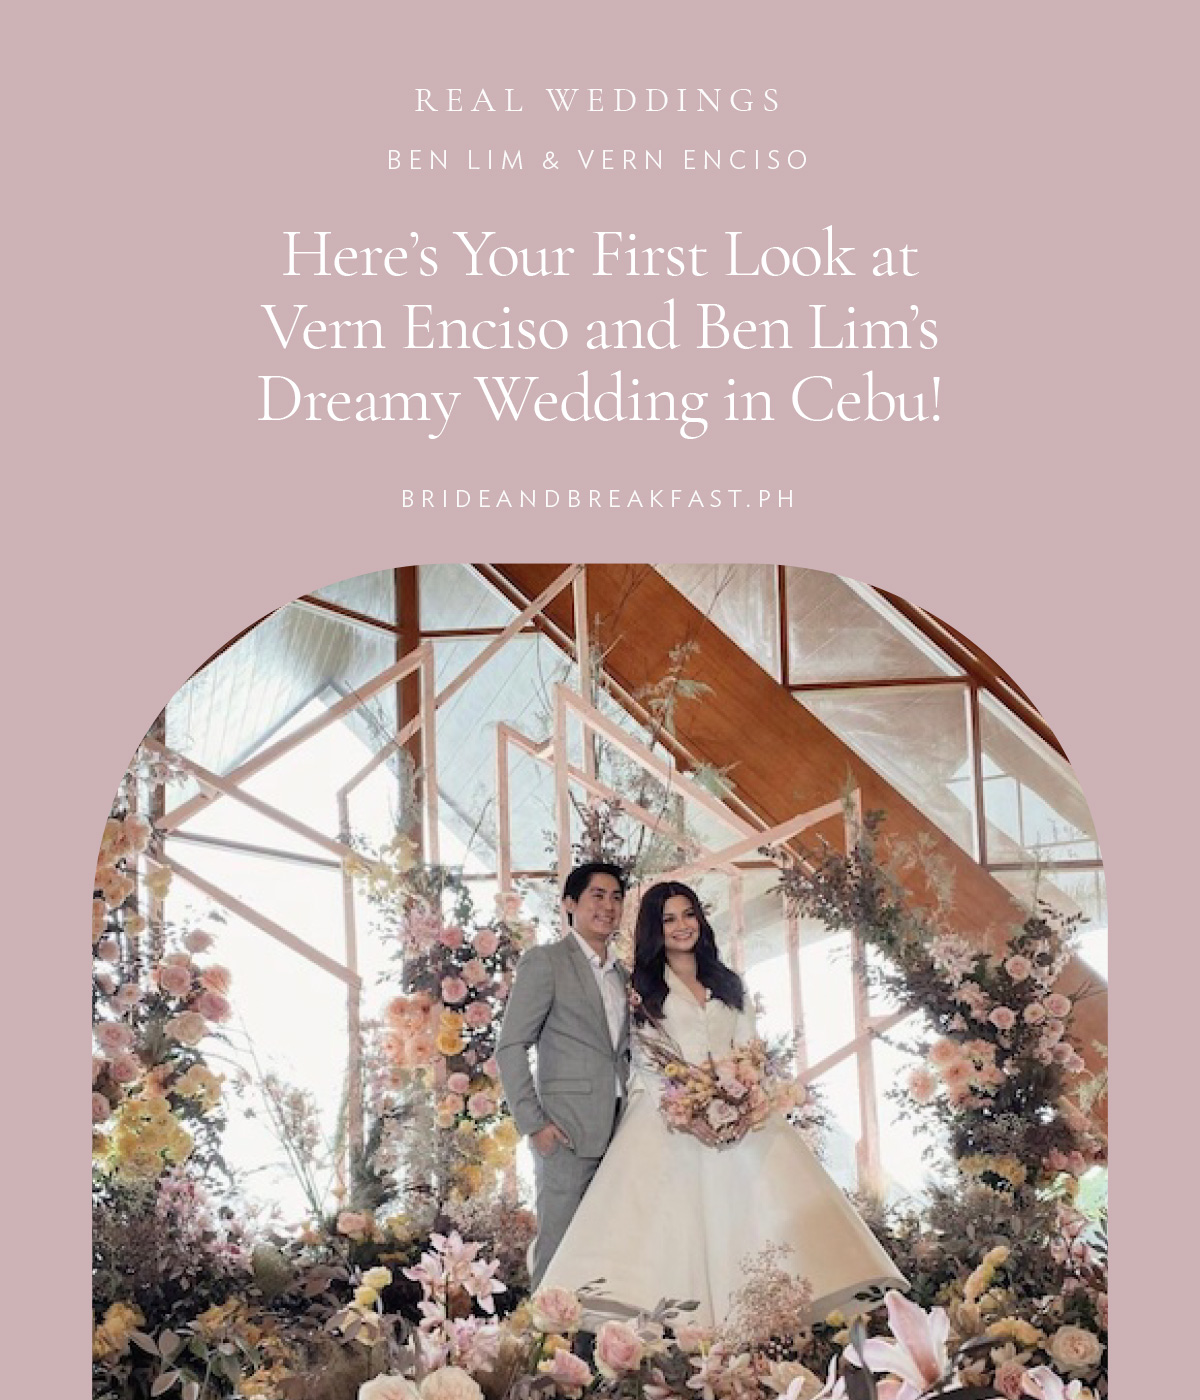 Here's Your First Look at Vern Enciso and Ben Lim's Dreamy Wedding in Cebu!